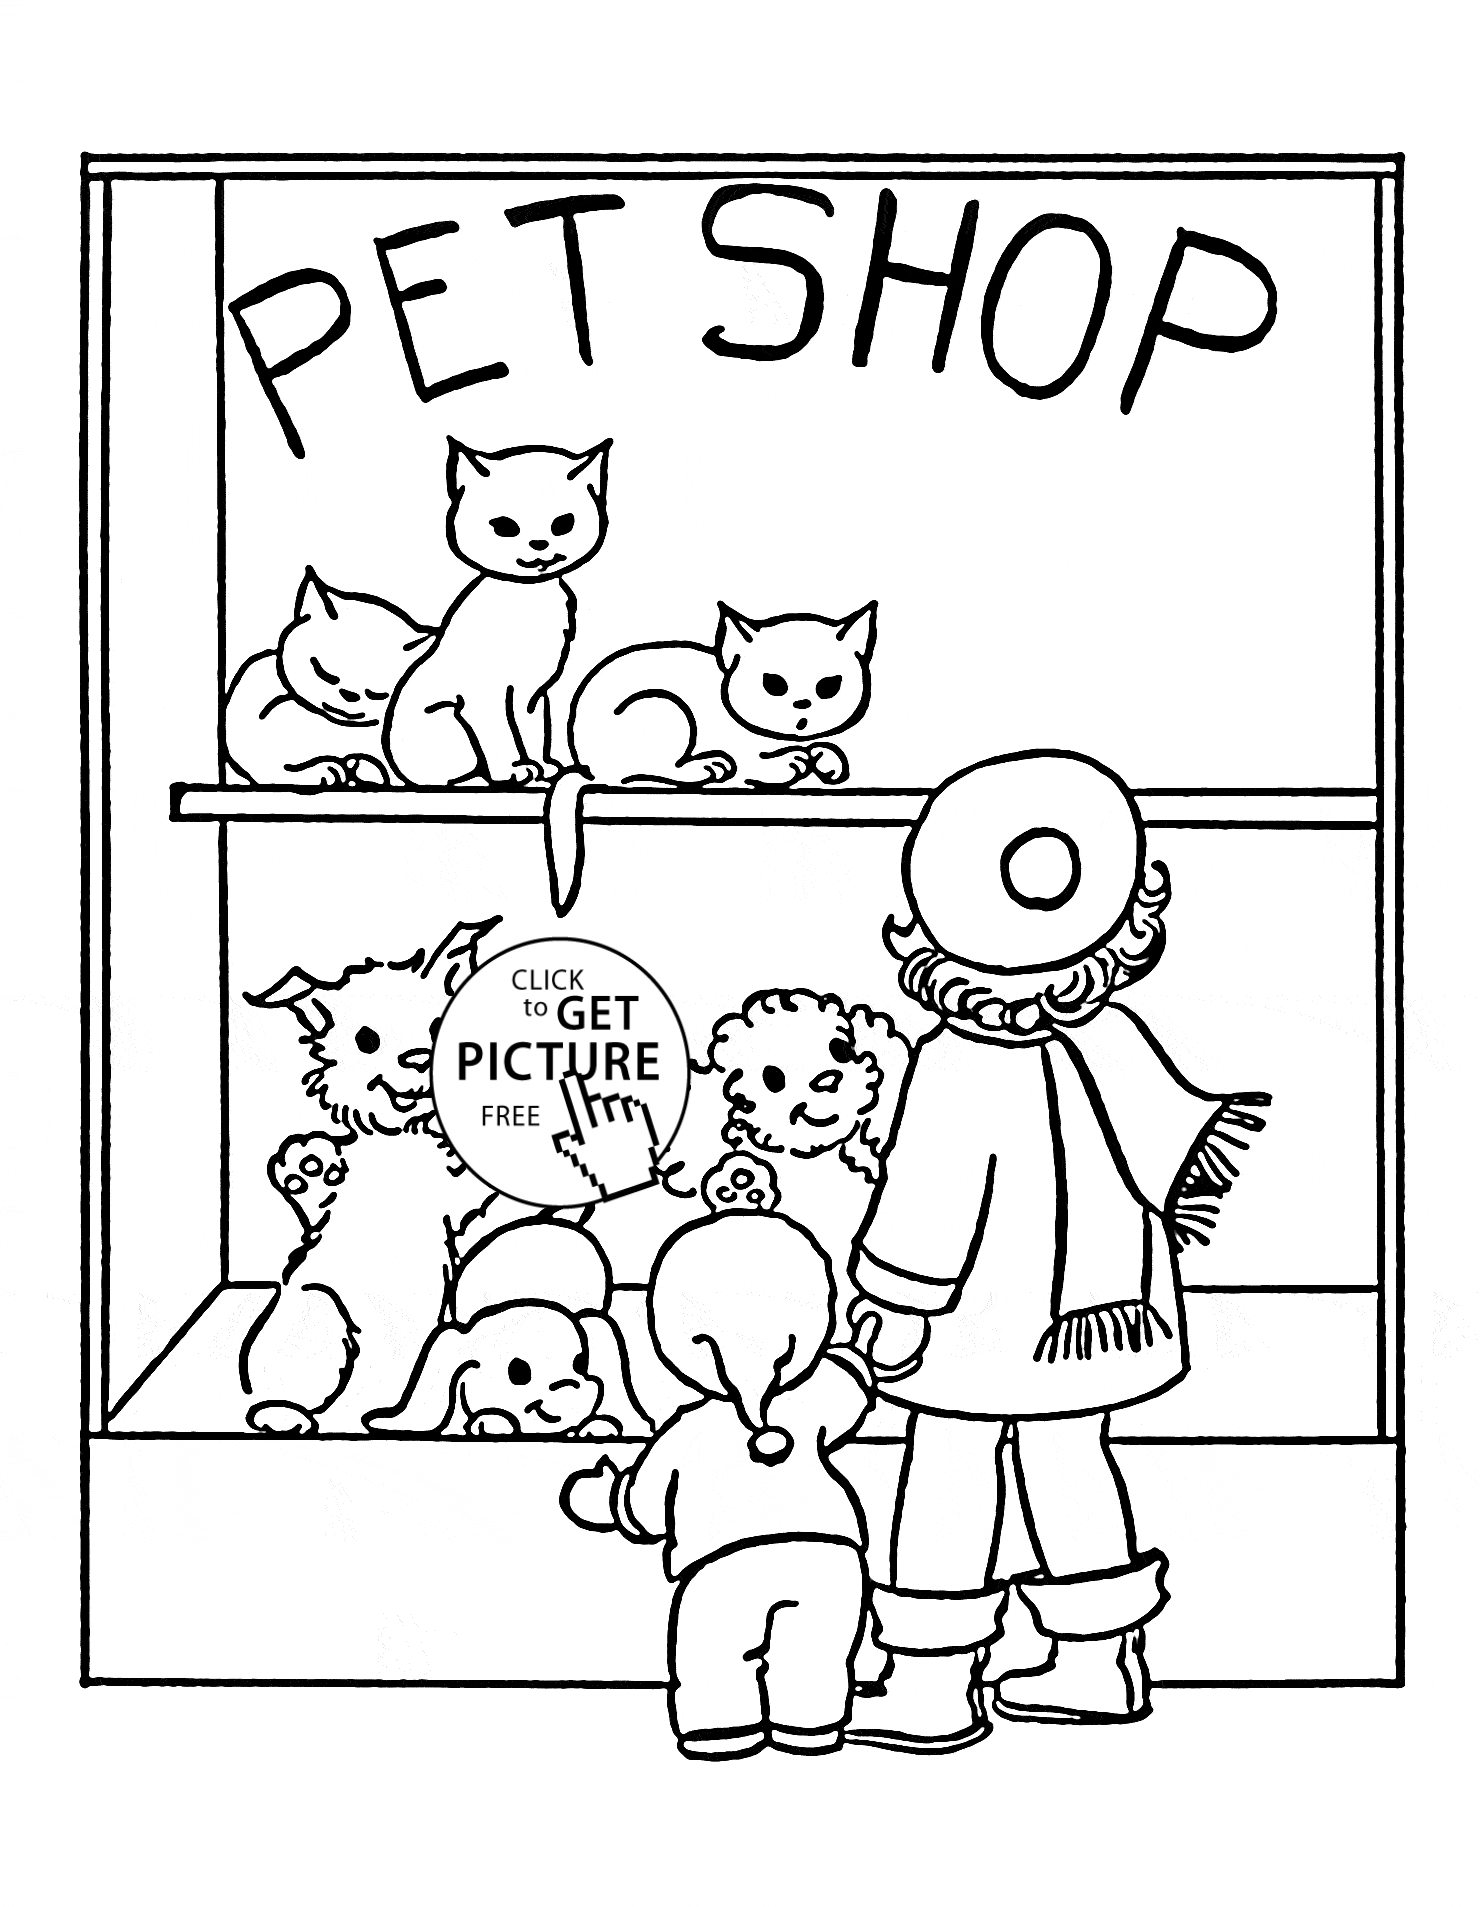 Pet Shop coloring page for kids, animal coloring pages printables ...